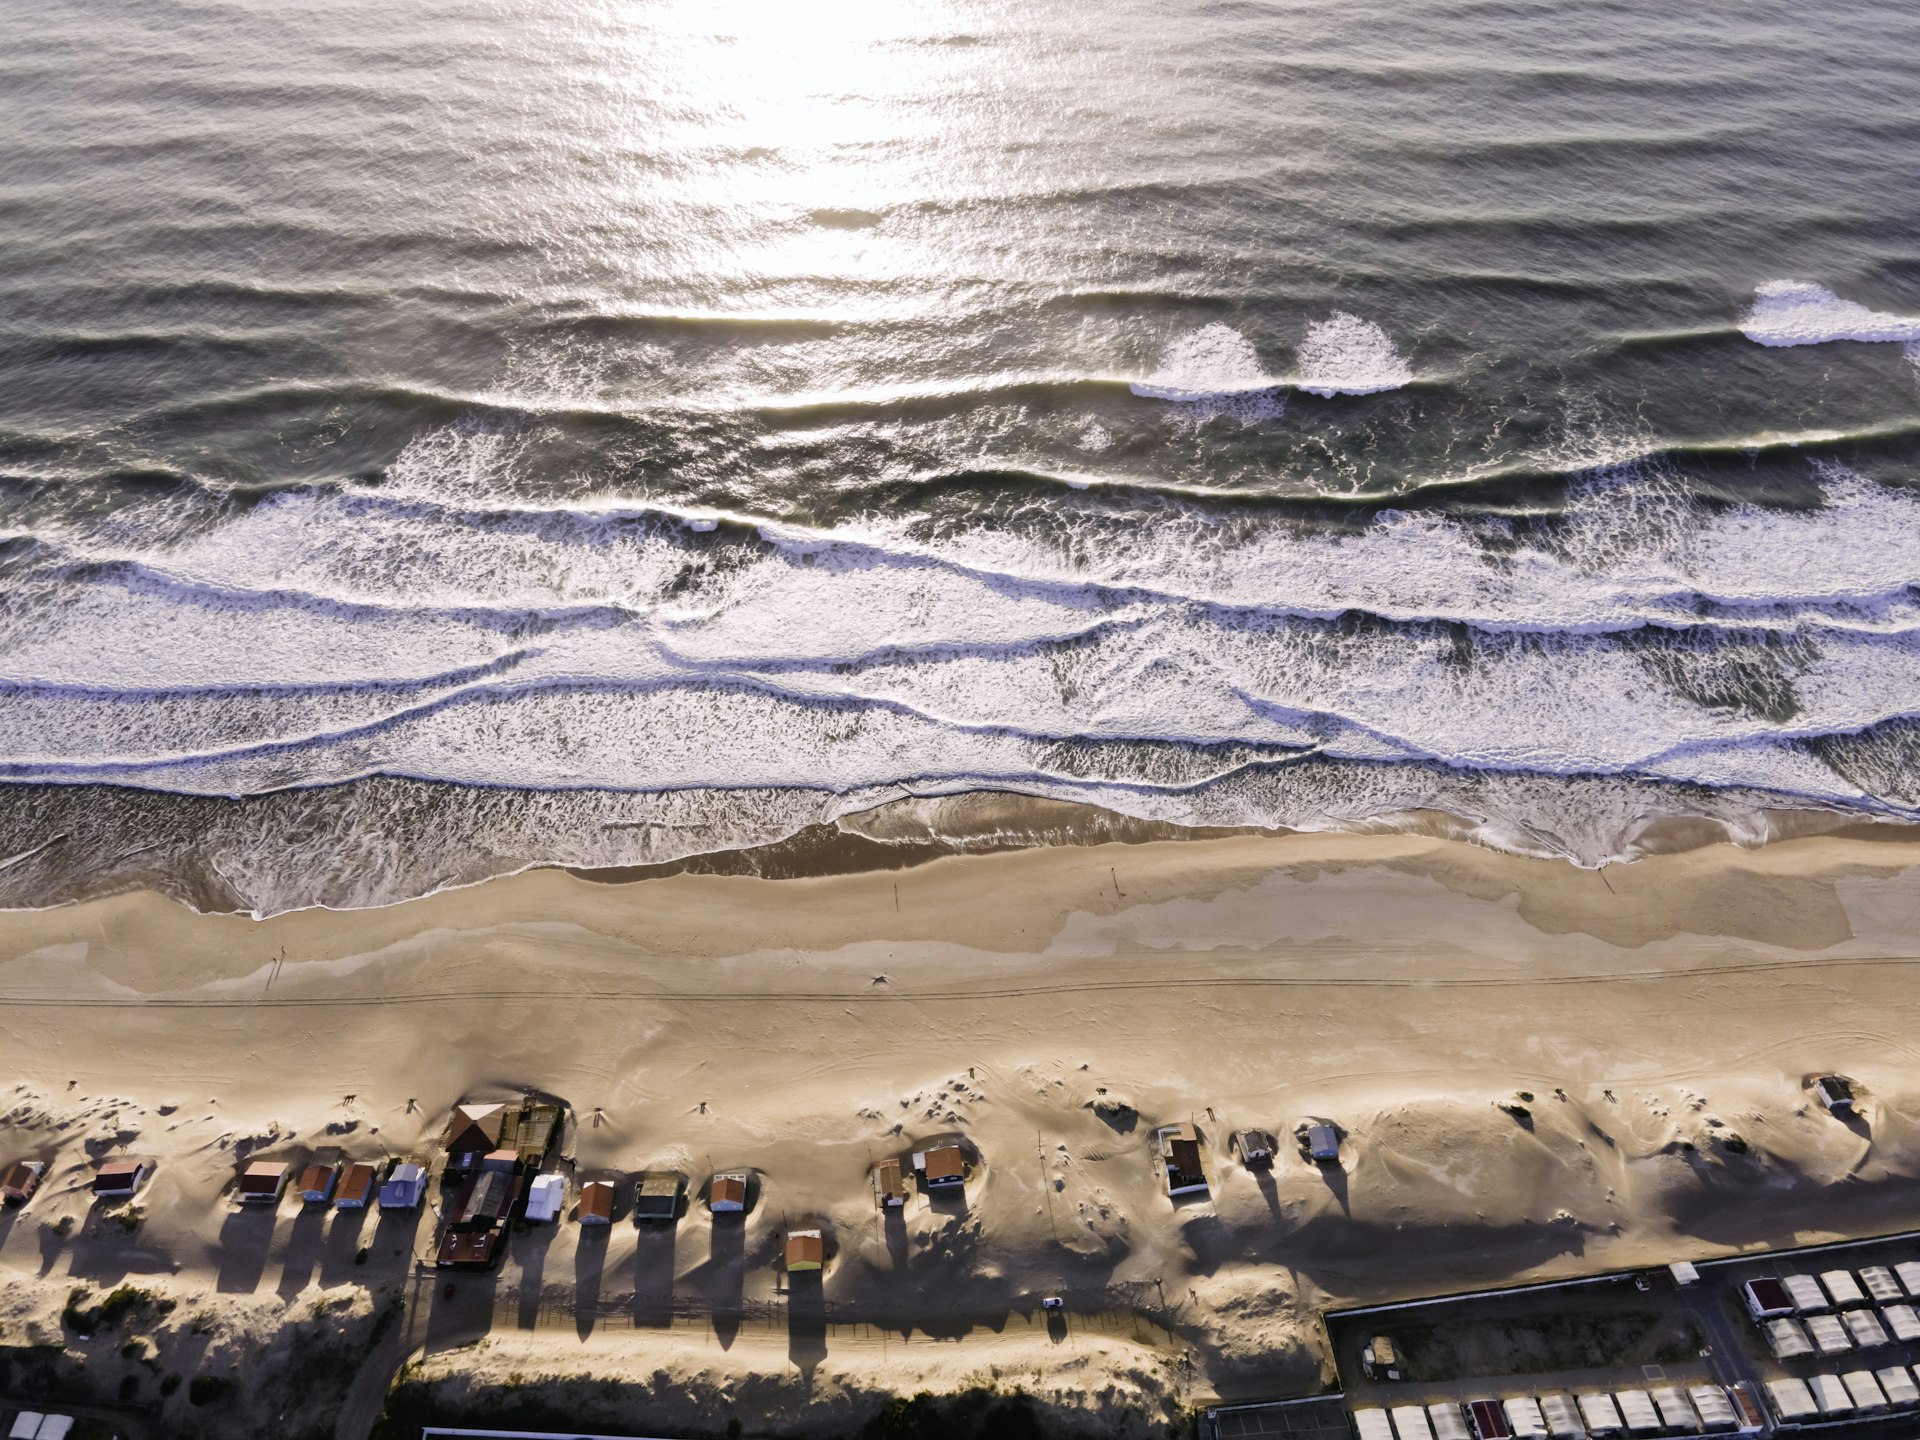 Aerial view of waves breaking on the long, beautiful beach of Costa da Caparica. A number of small shacks stand on the otherwise empty sand.